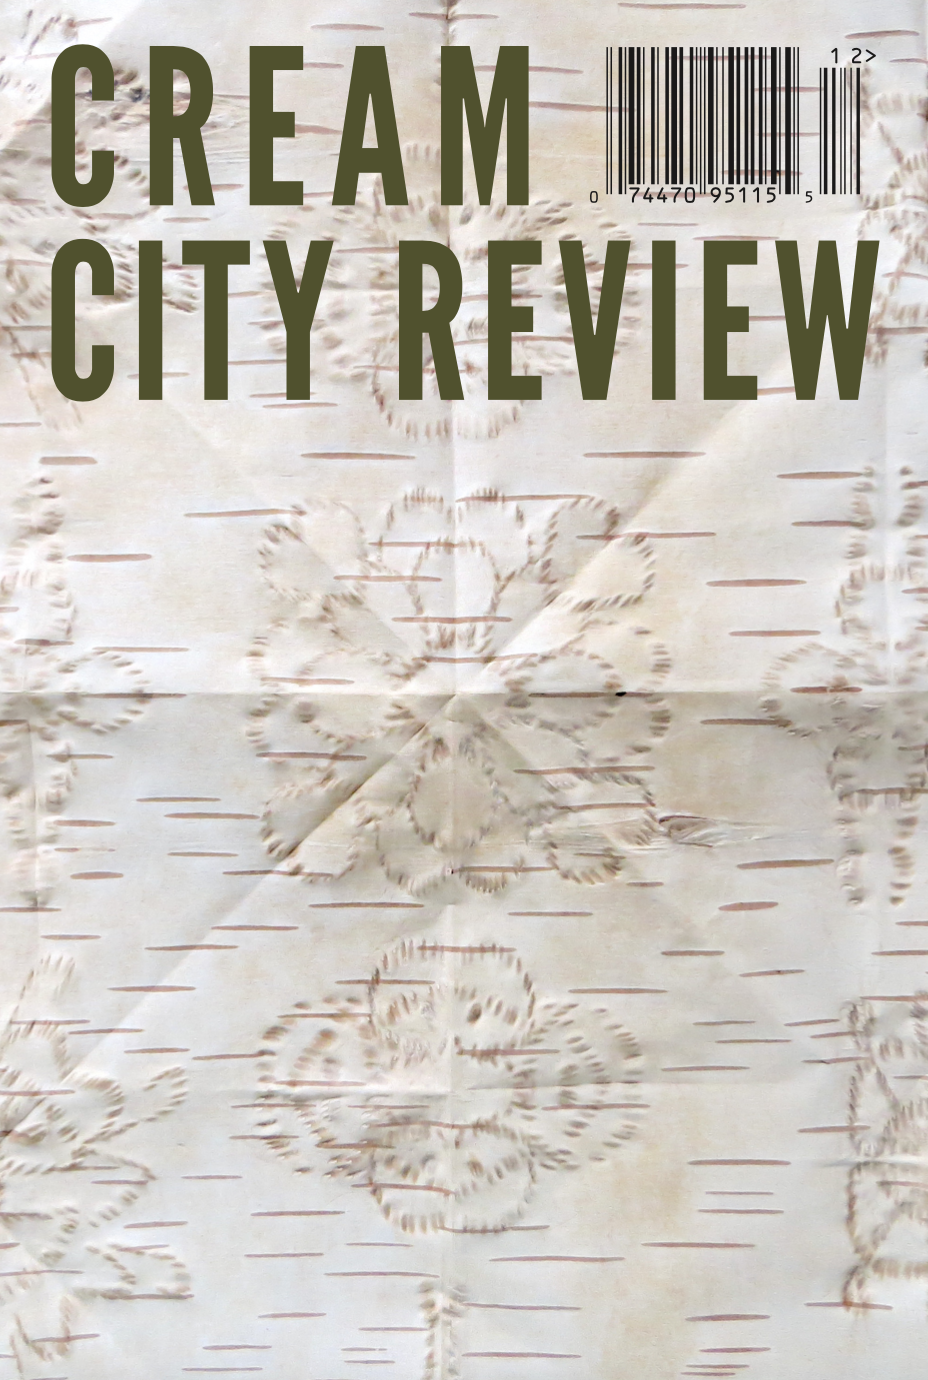 Photo of cover of Cream City Review Issue 44.1